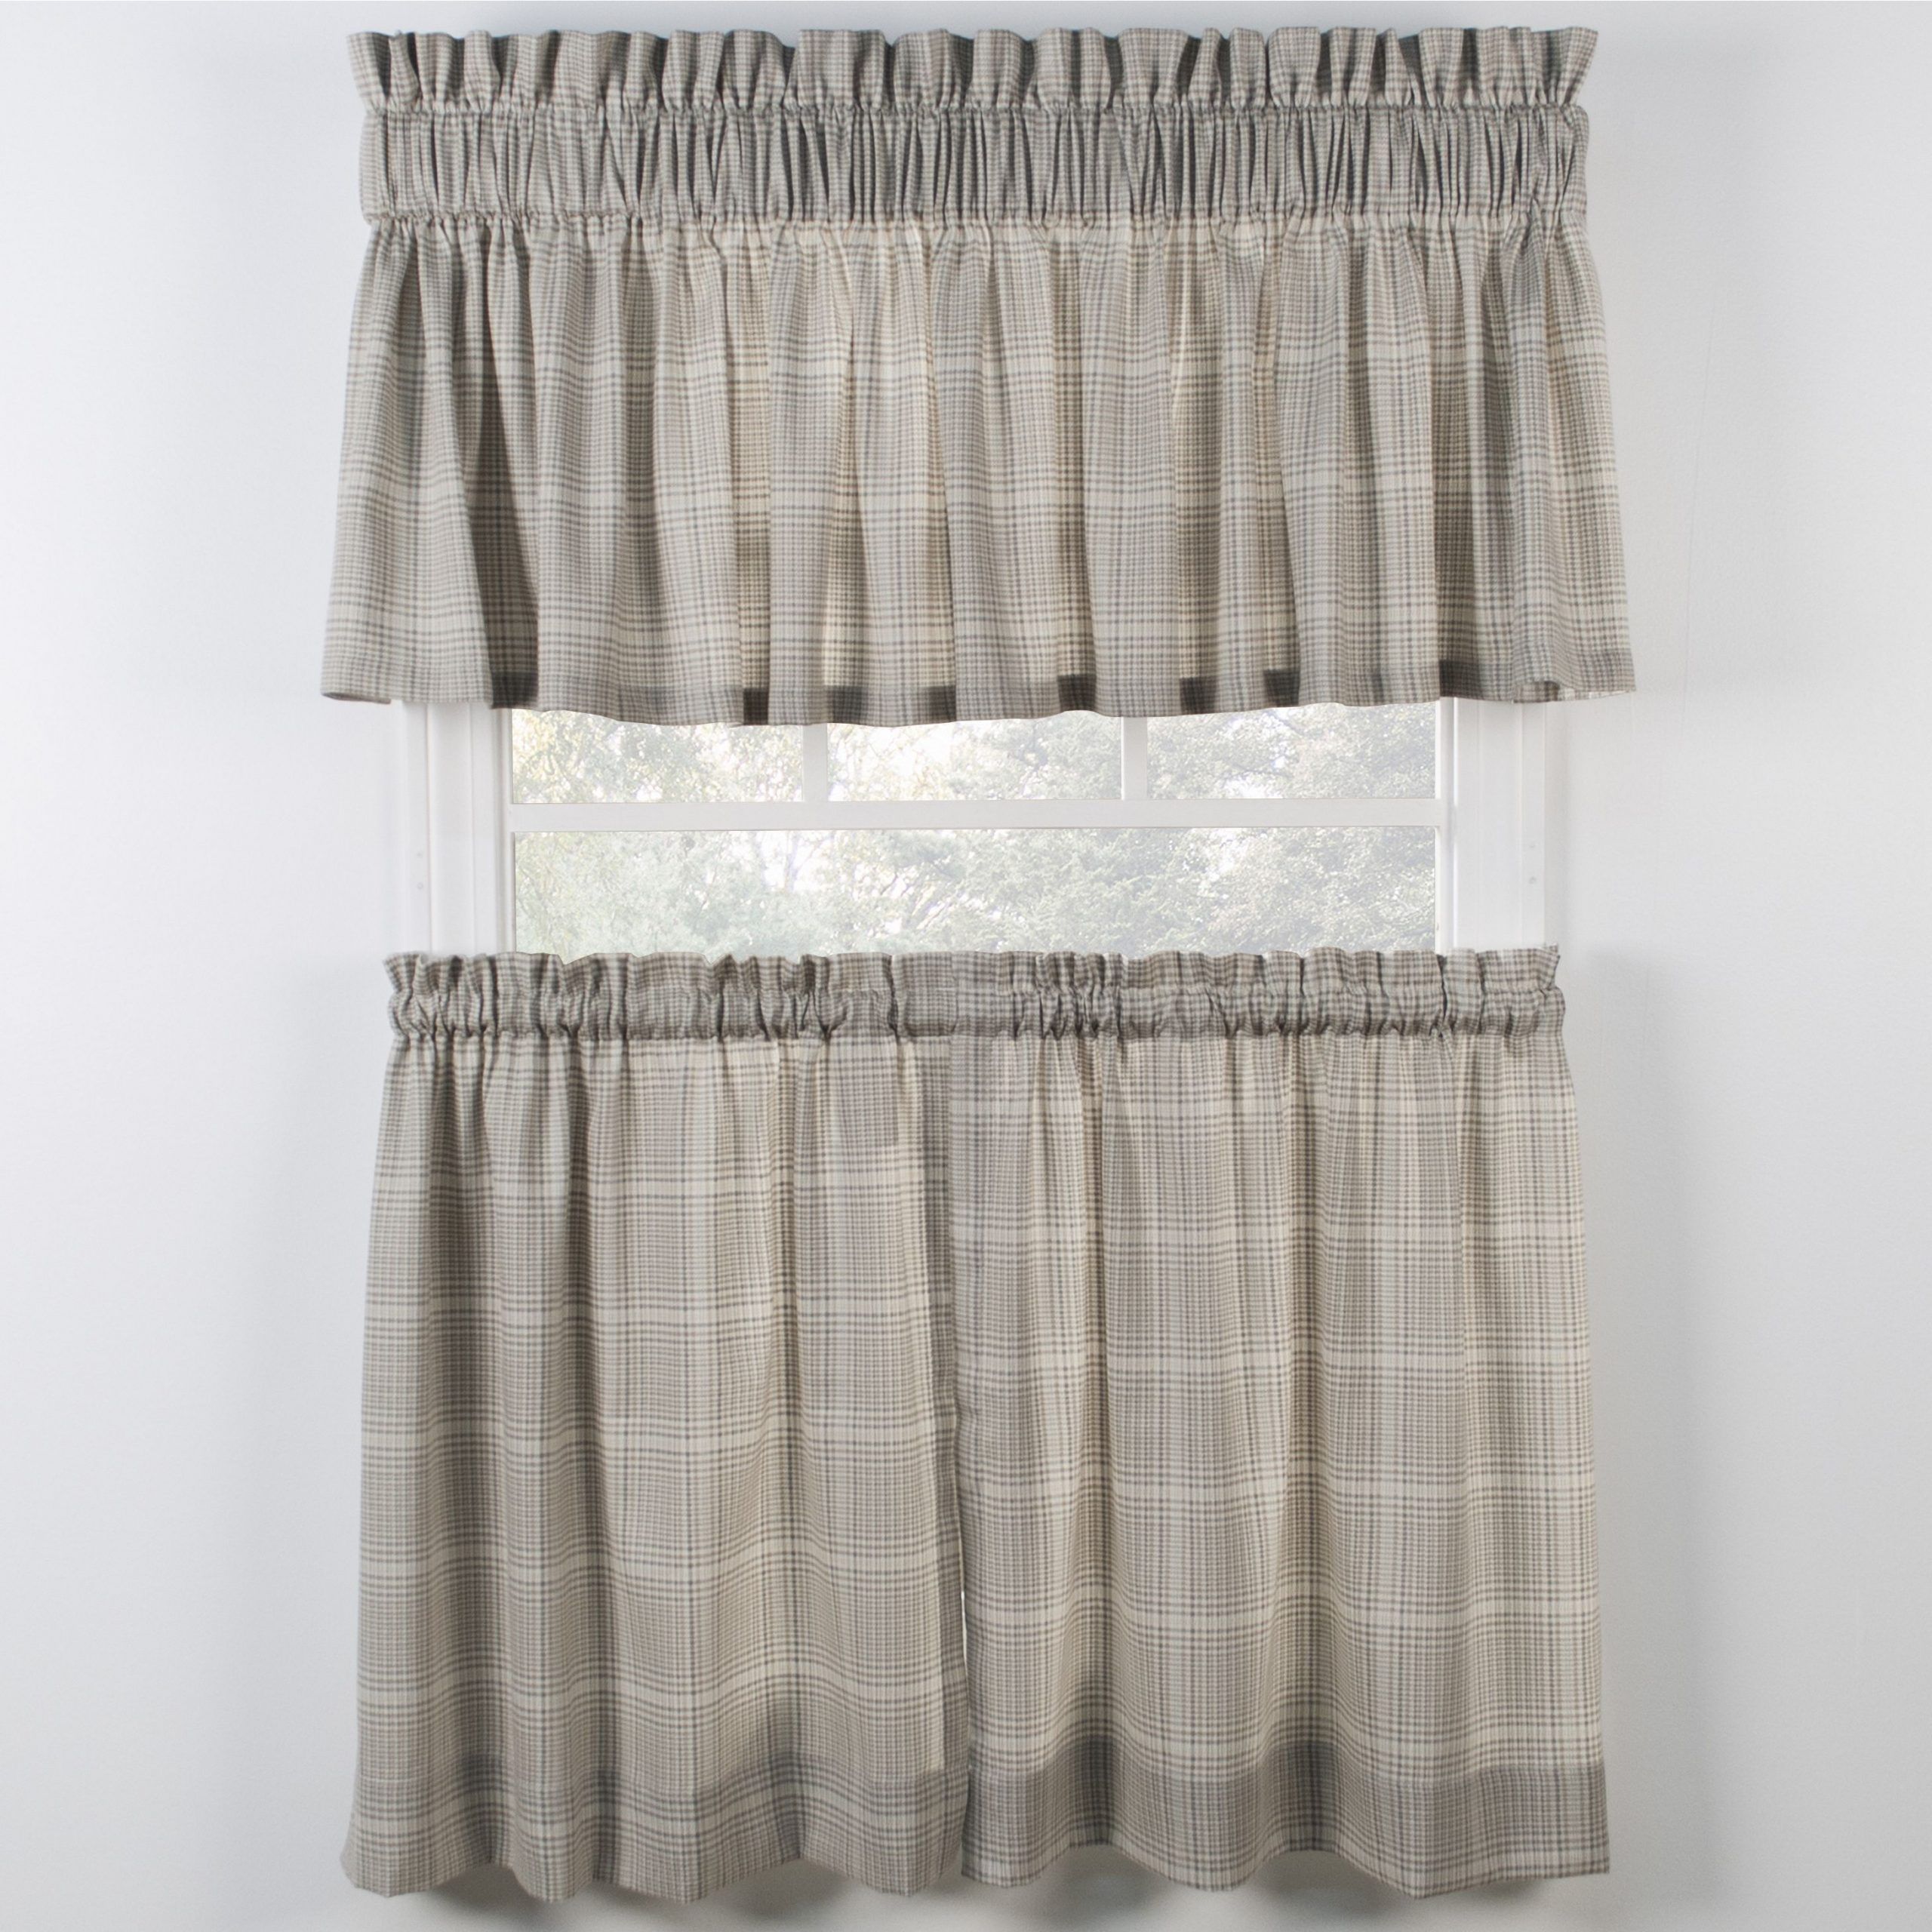 Morrison Natural Tiers And Tailored Valance Sold Spereately Within Tailored Valance And Tier Curtains (View 15 of 20)